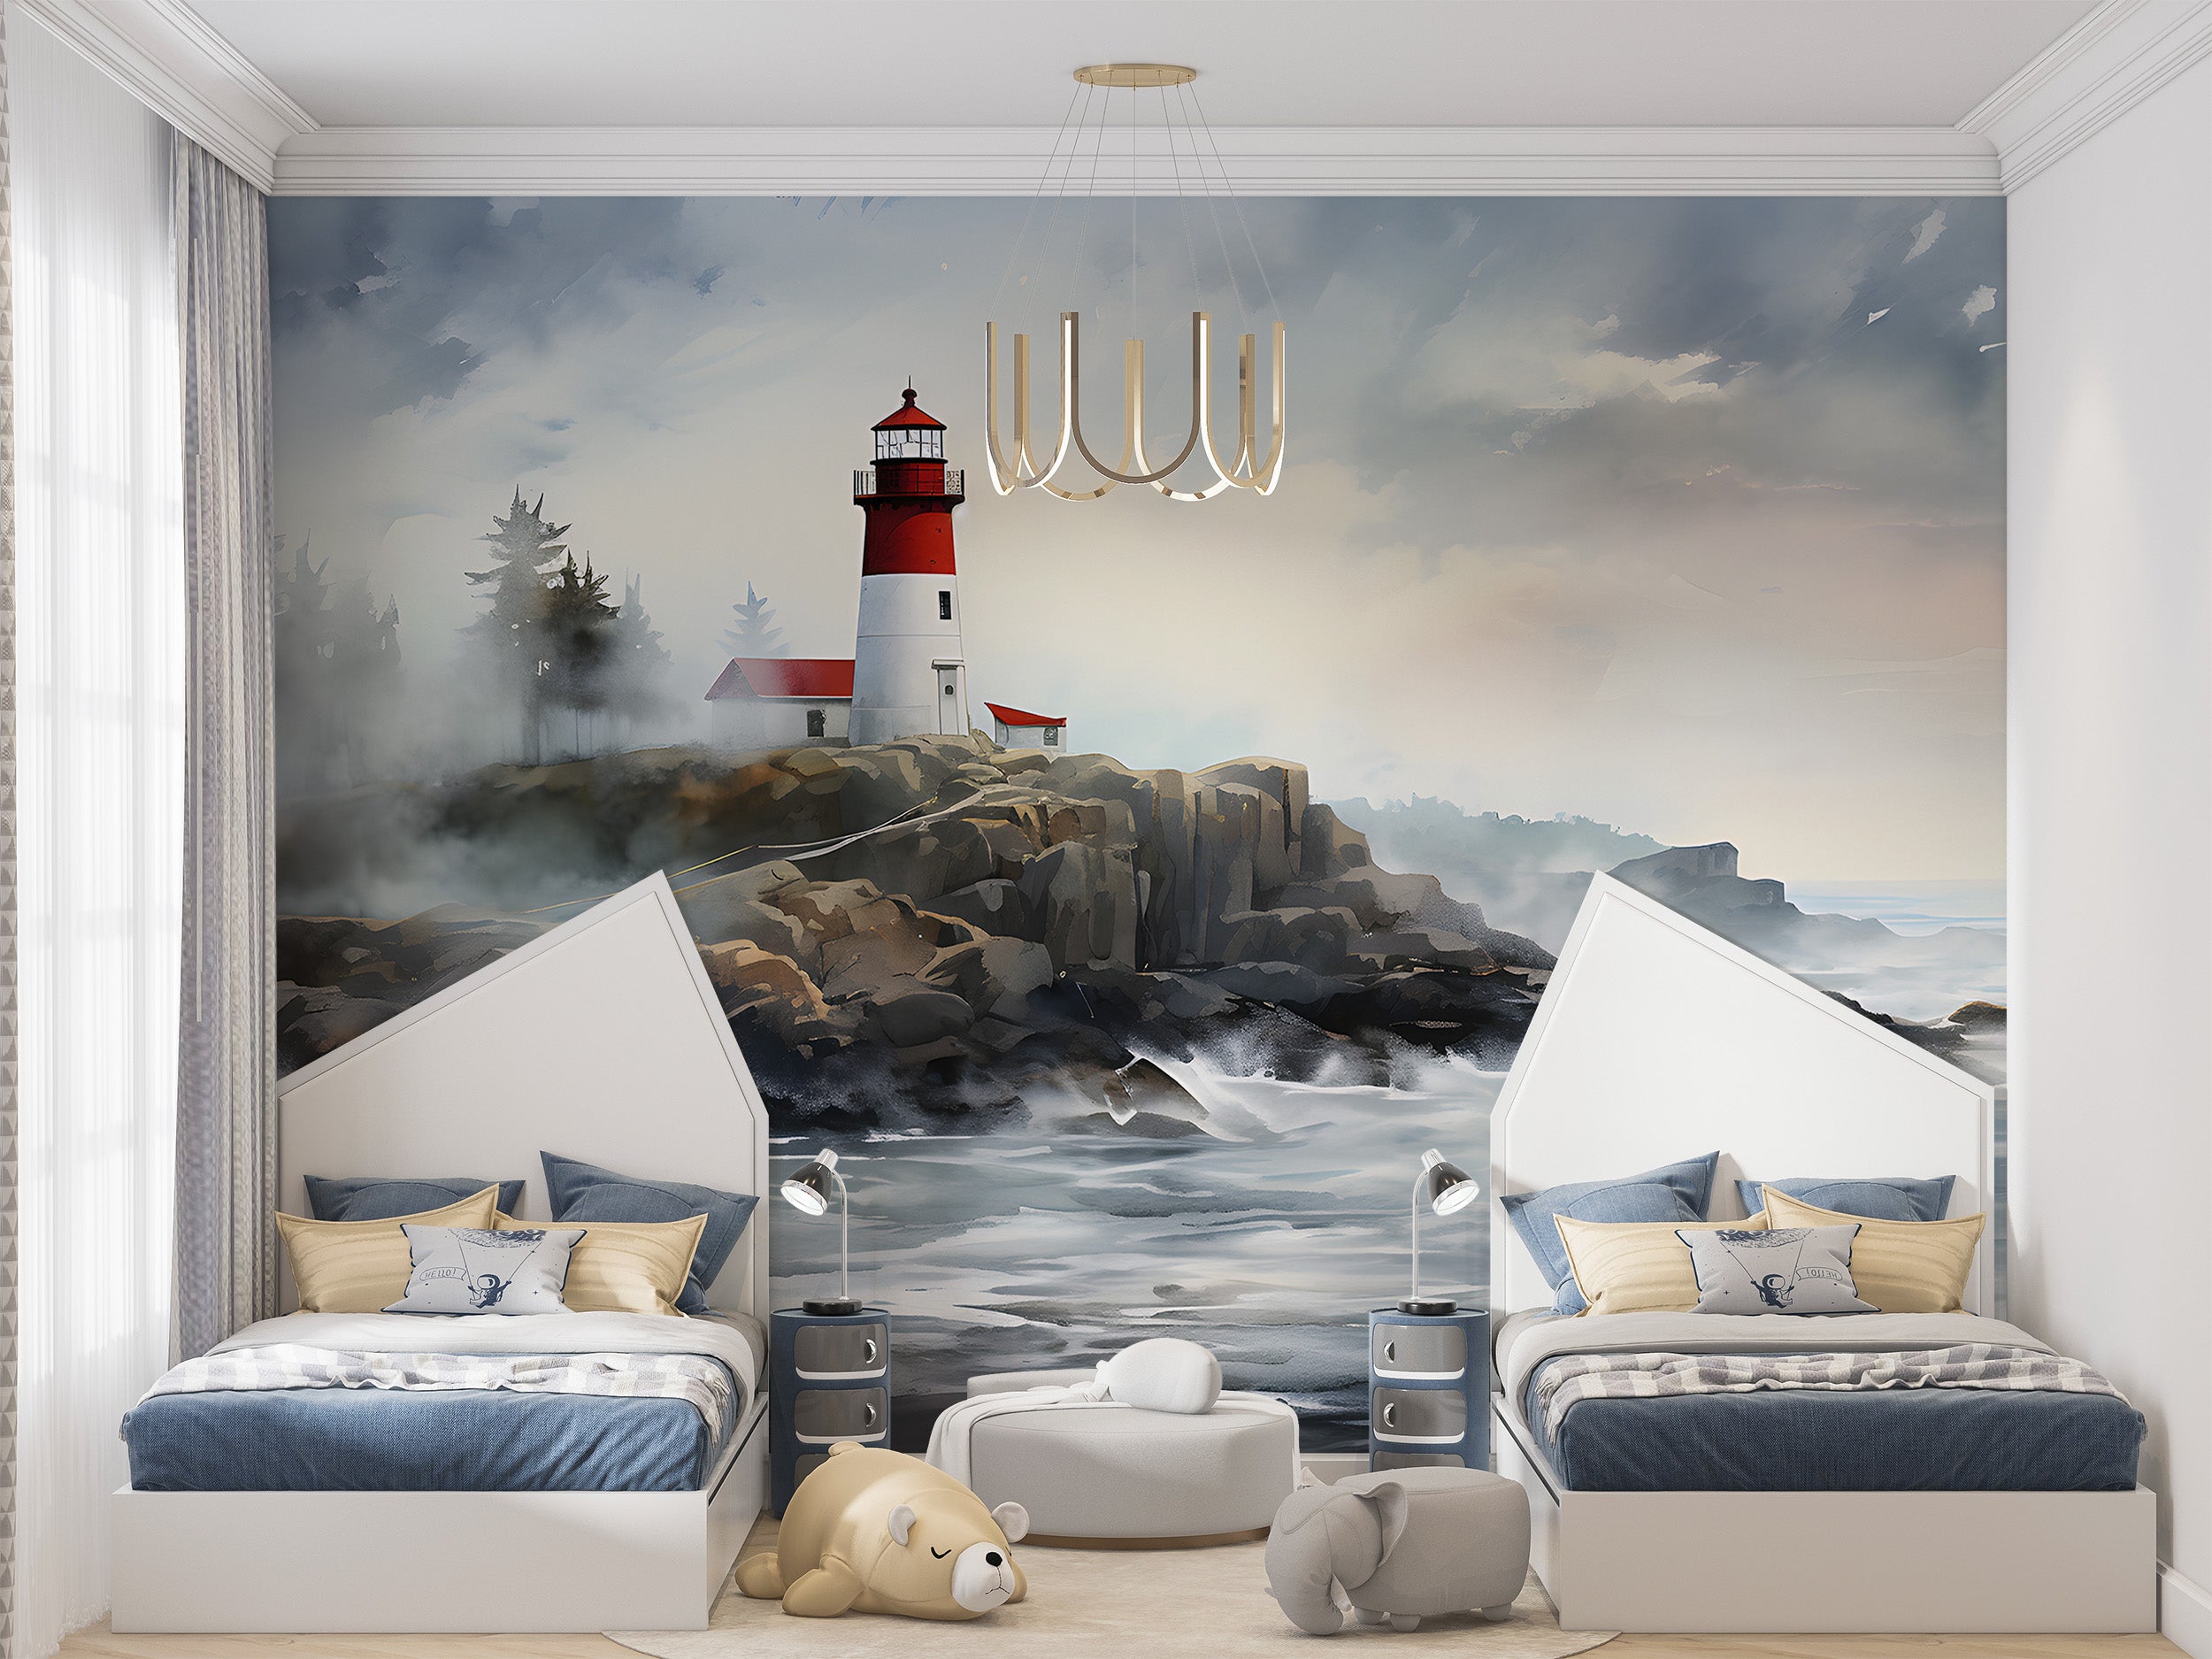 Redefine Your Space with Tranquil Ocean Vibes